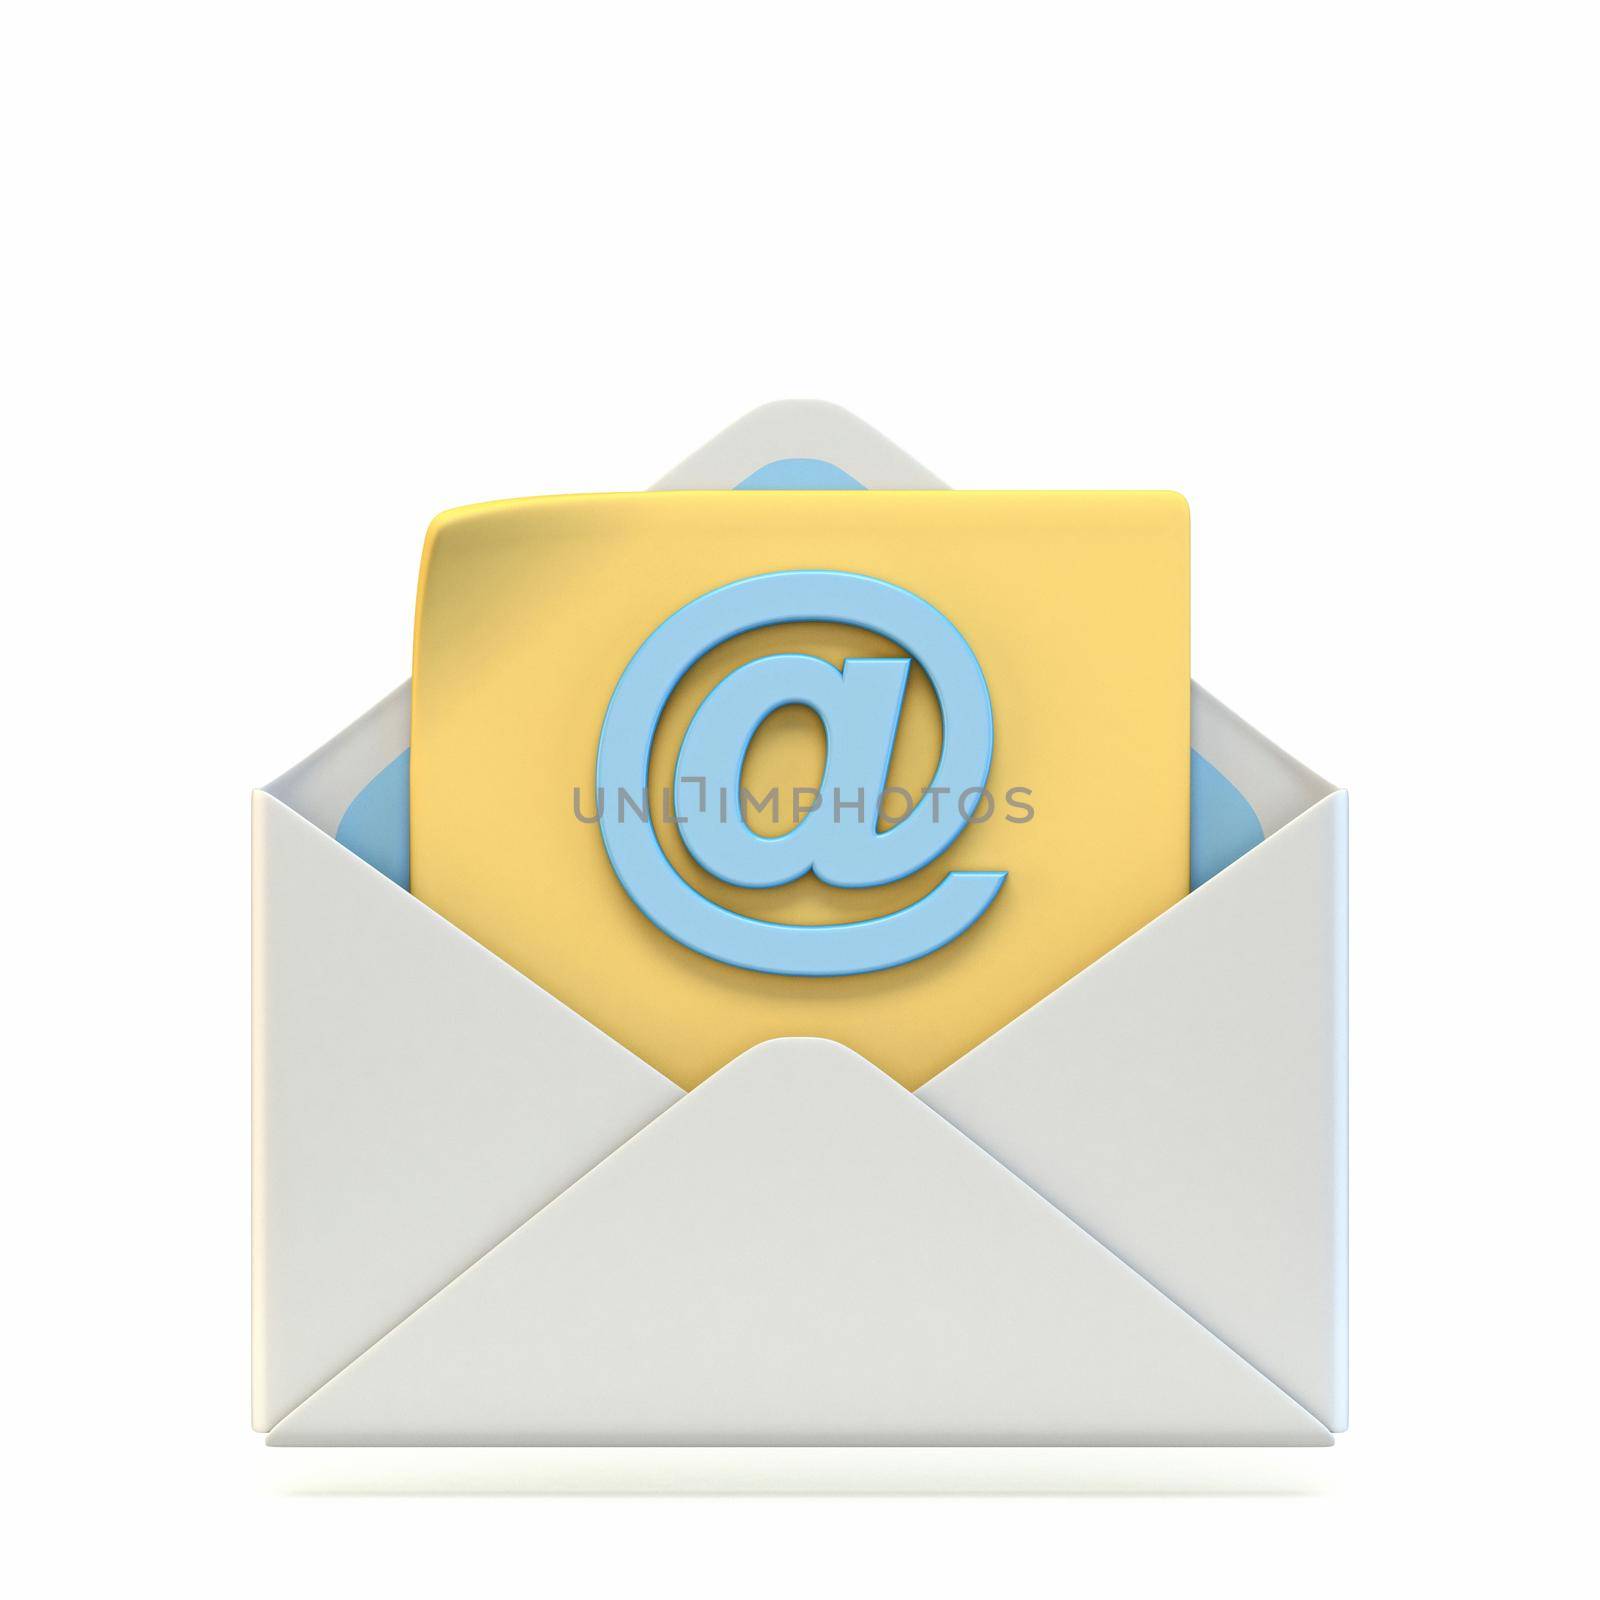 Mail icon with AT symbol 3D render illustration isolated on white background